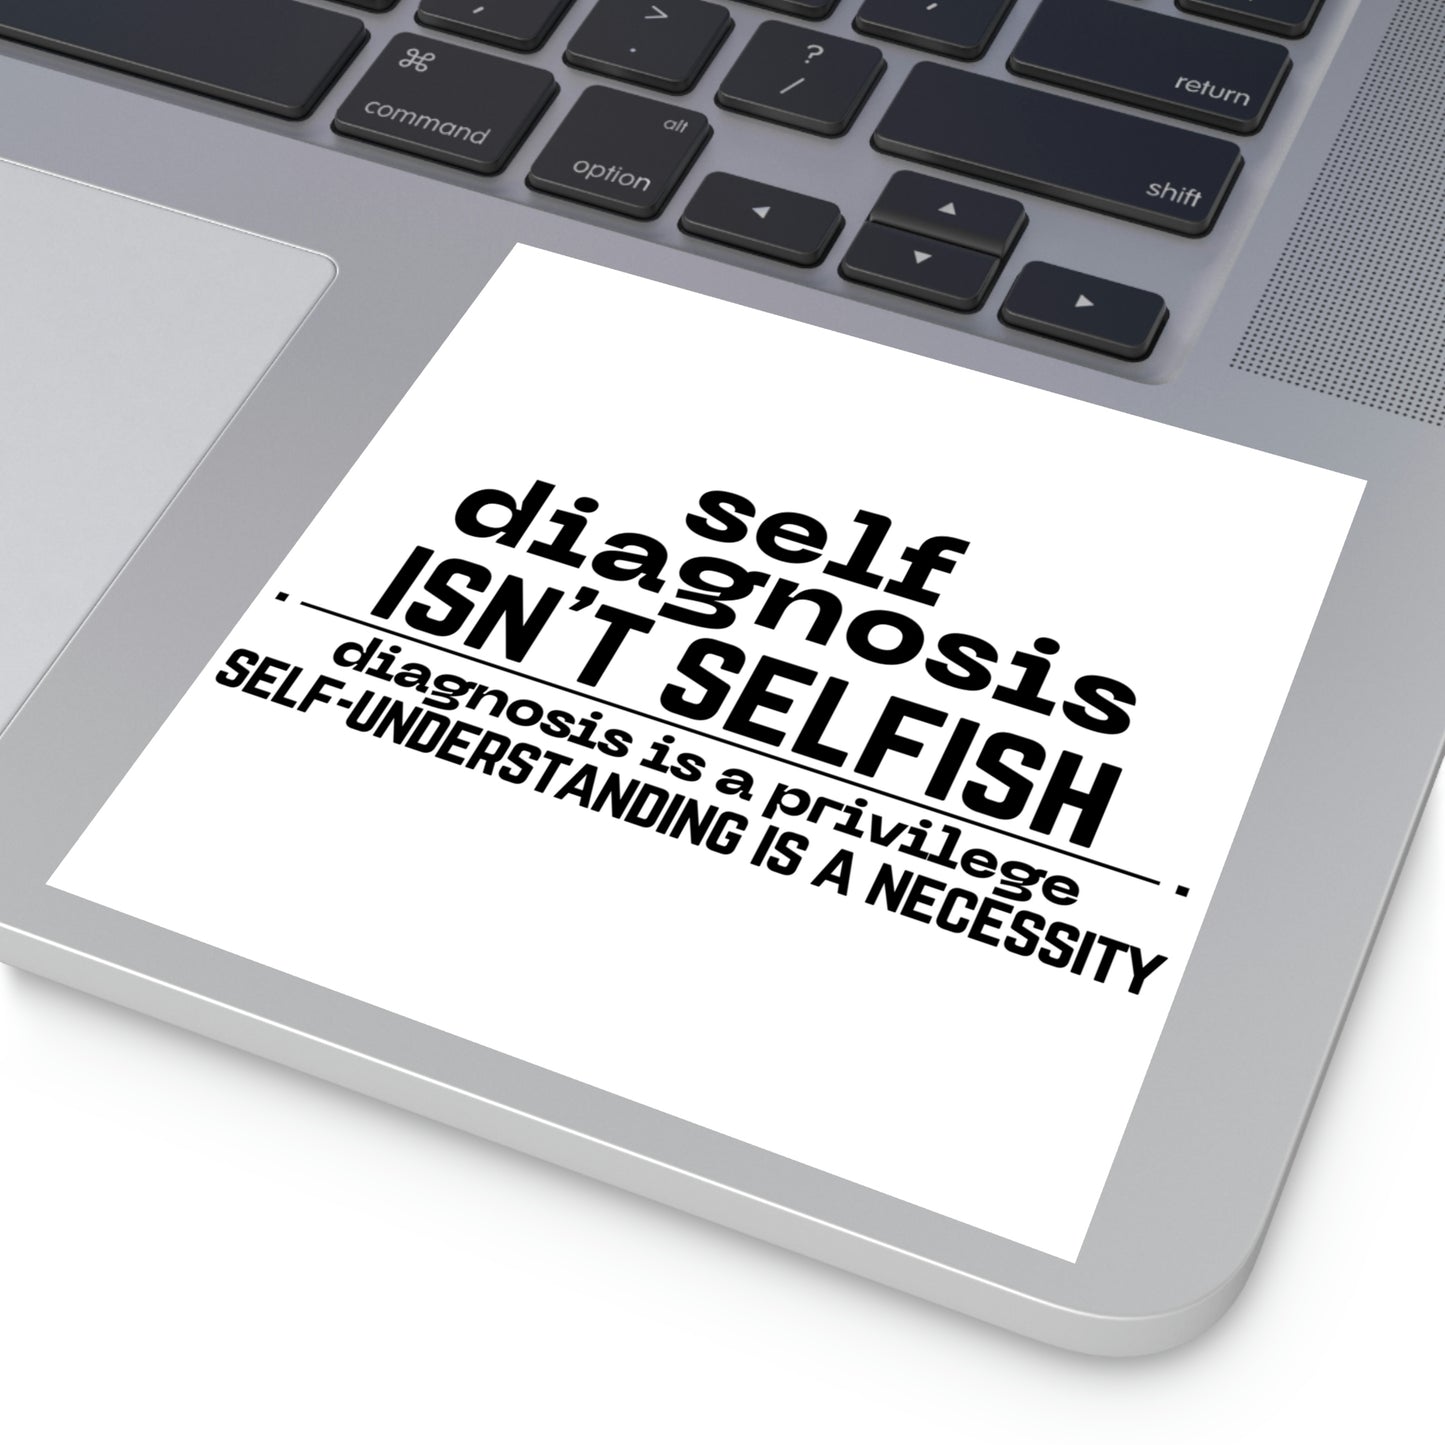 "Self Diagnosis Isn't Selfish" Square Stickers [Indoor\Outdoor]